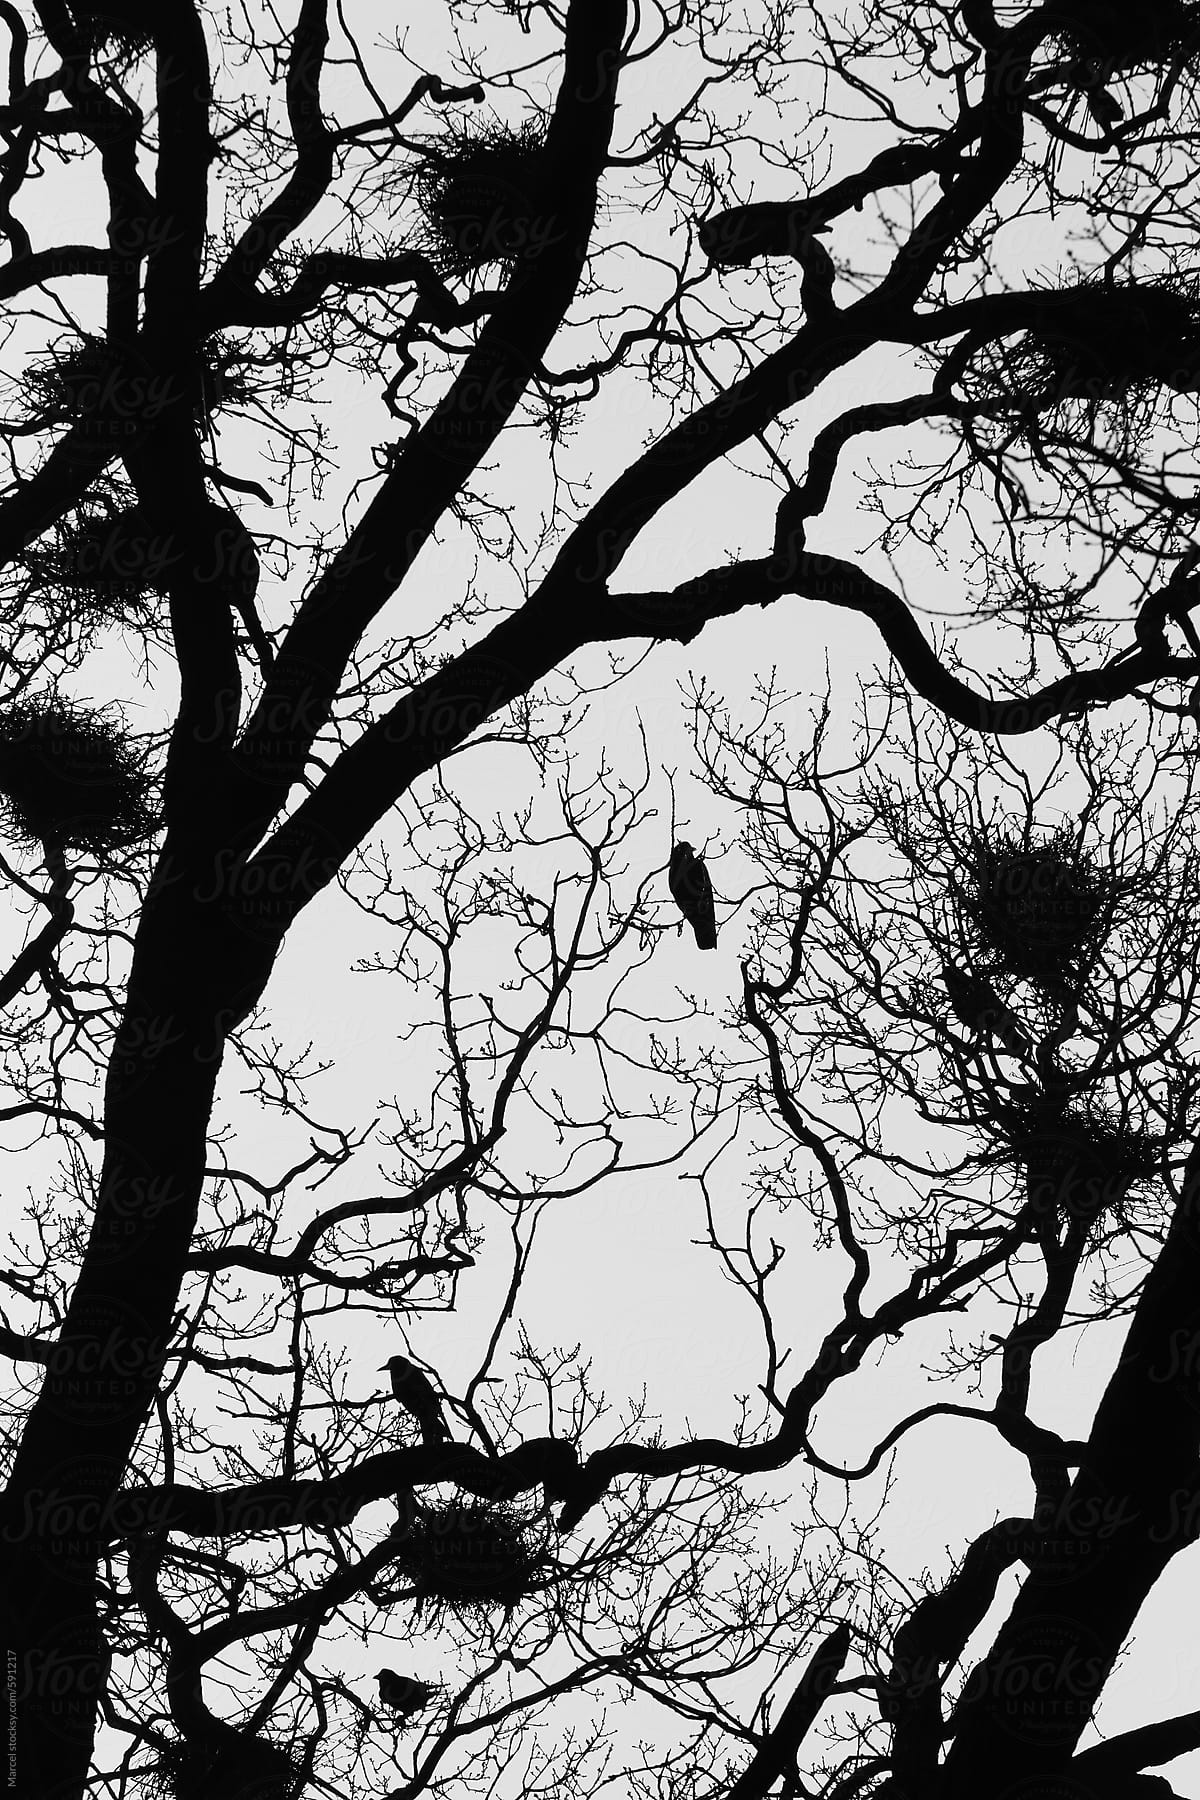 Curly tree with black crows and their nests